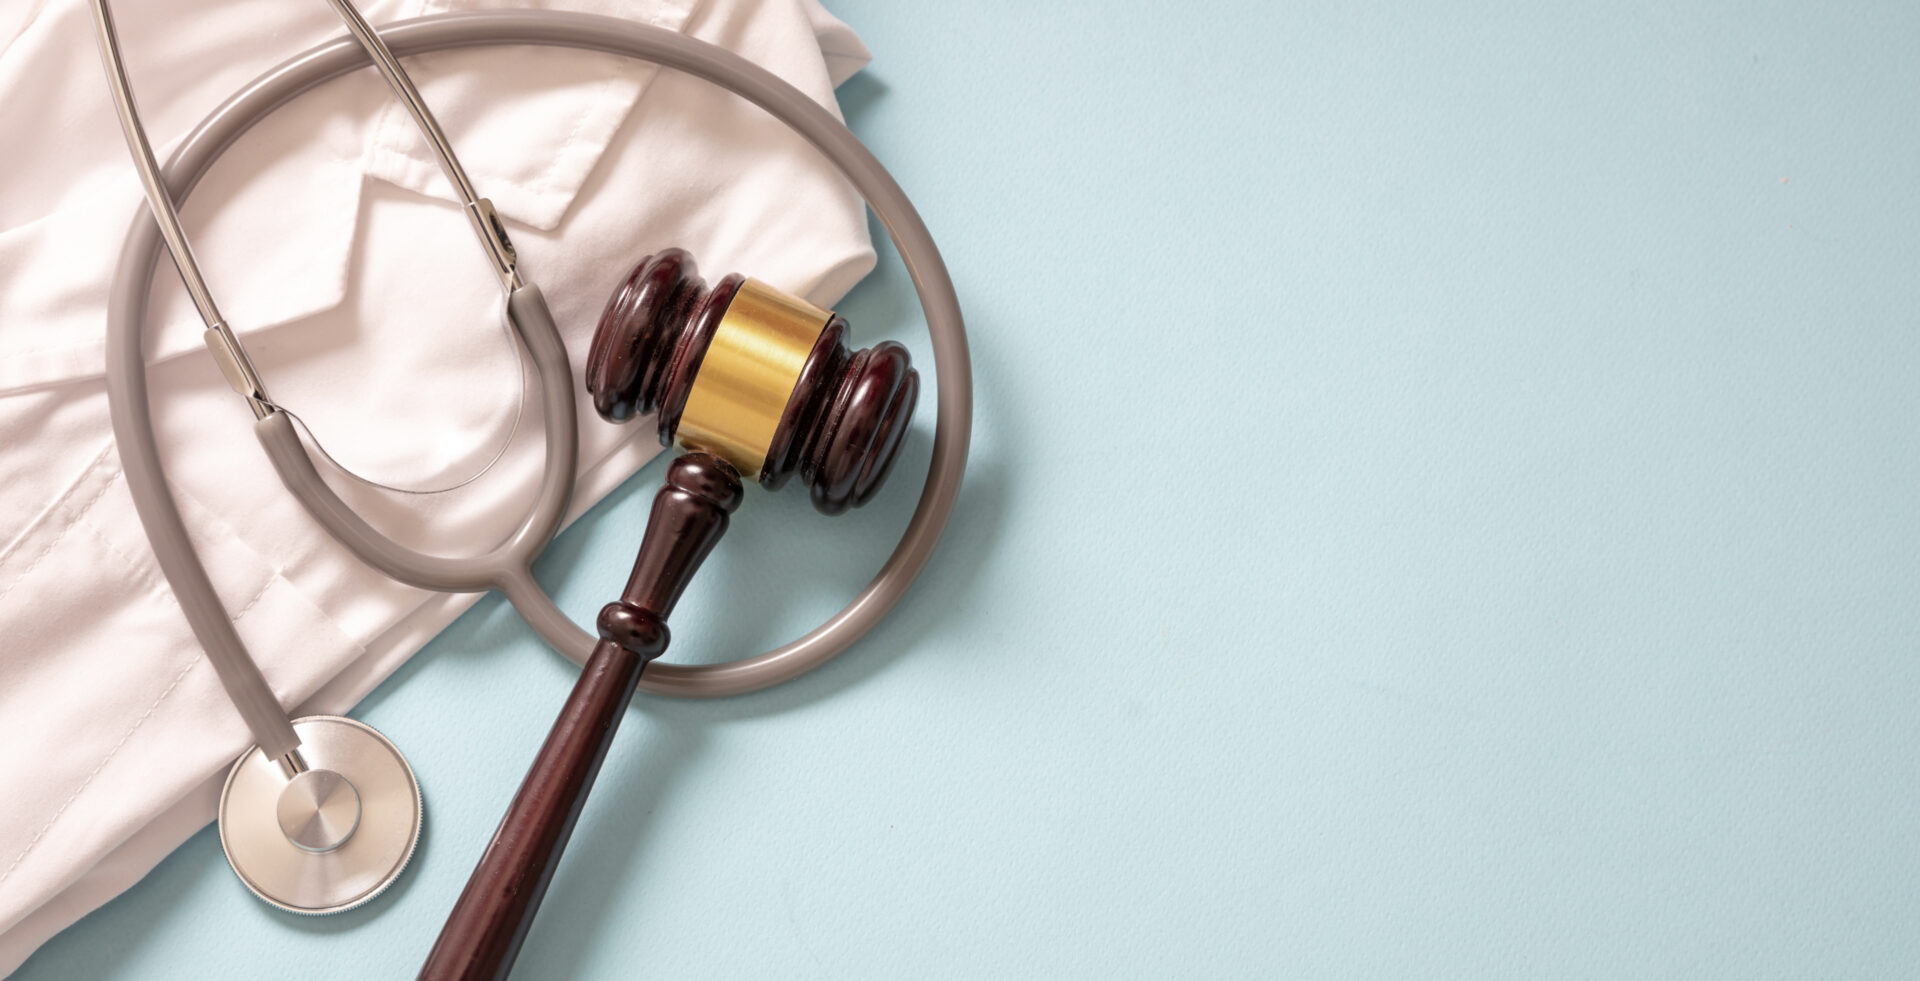 court gavel on top of a stethescope and doctor lab gown